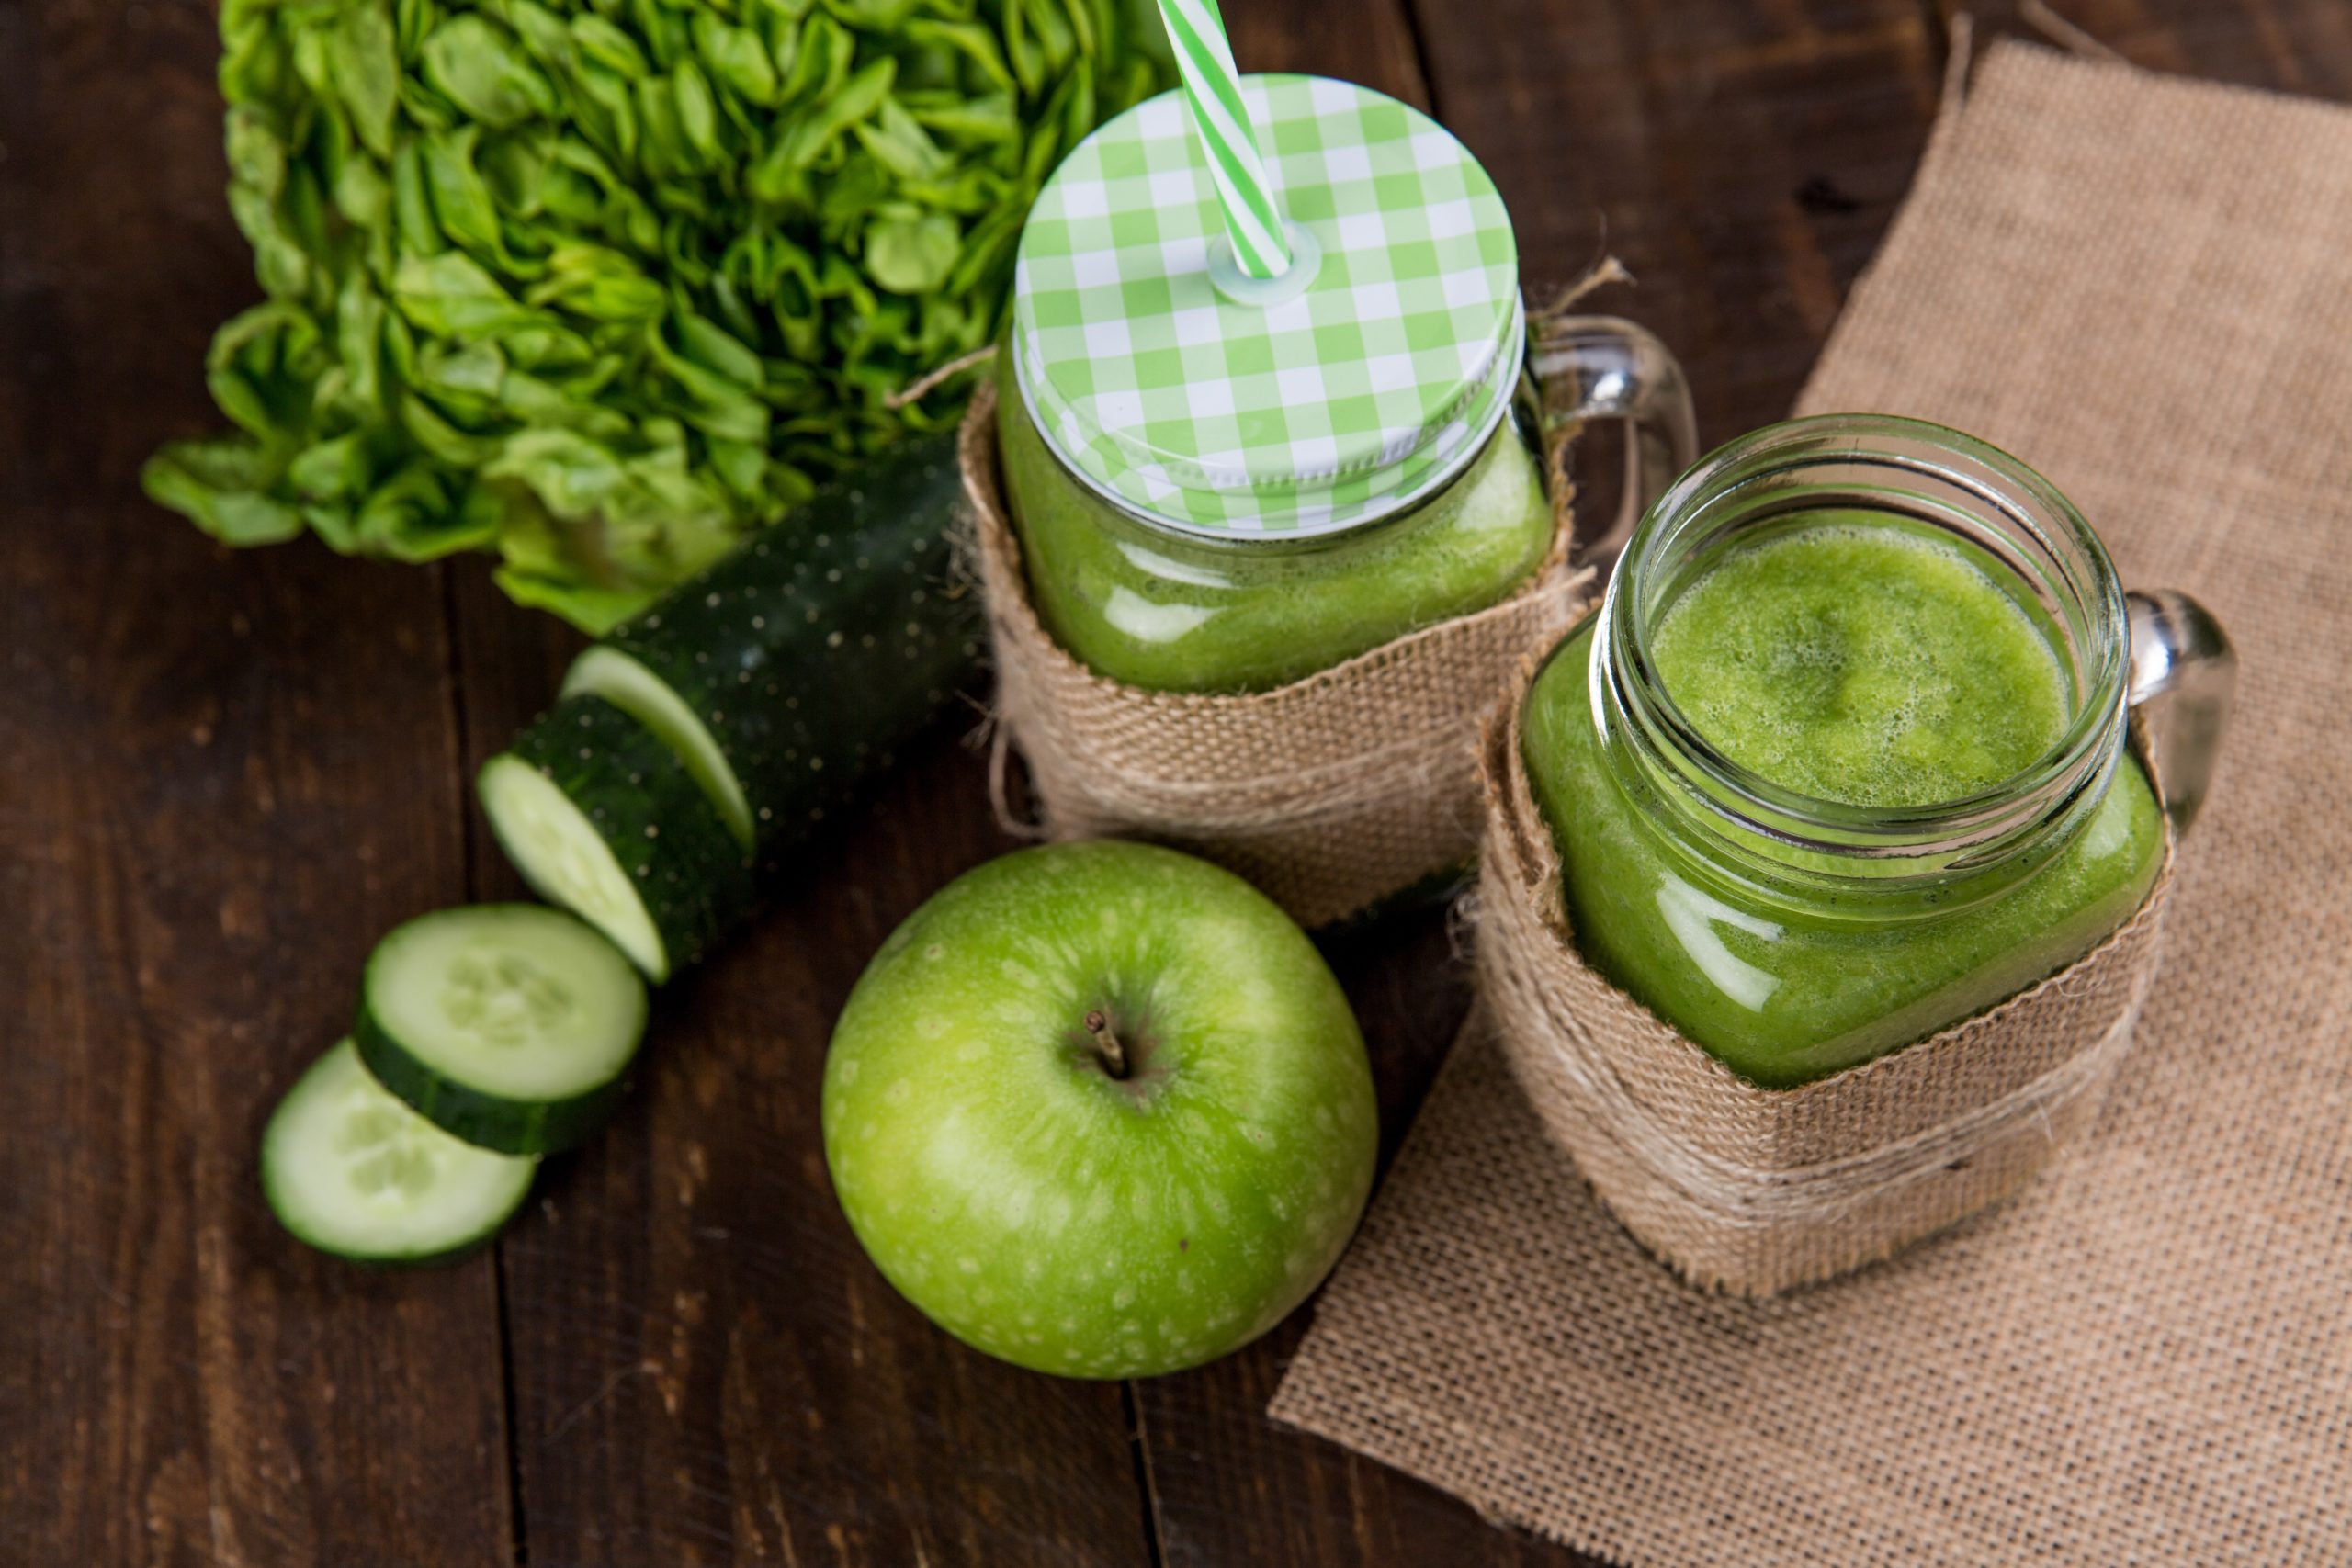 A green smoothie made with apples and cucumbers provides physical therapy benefits.